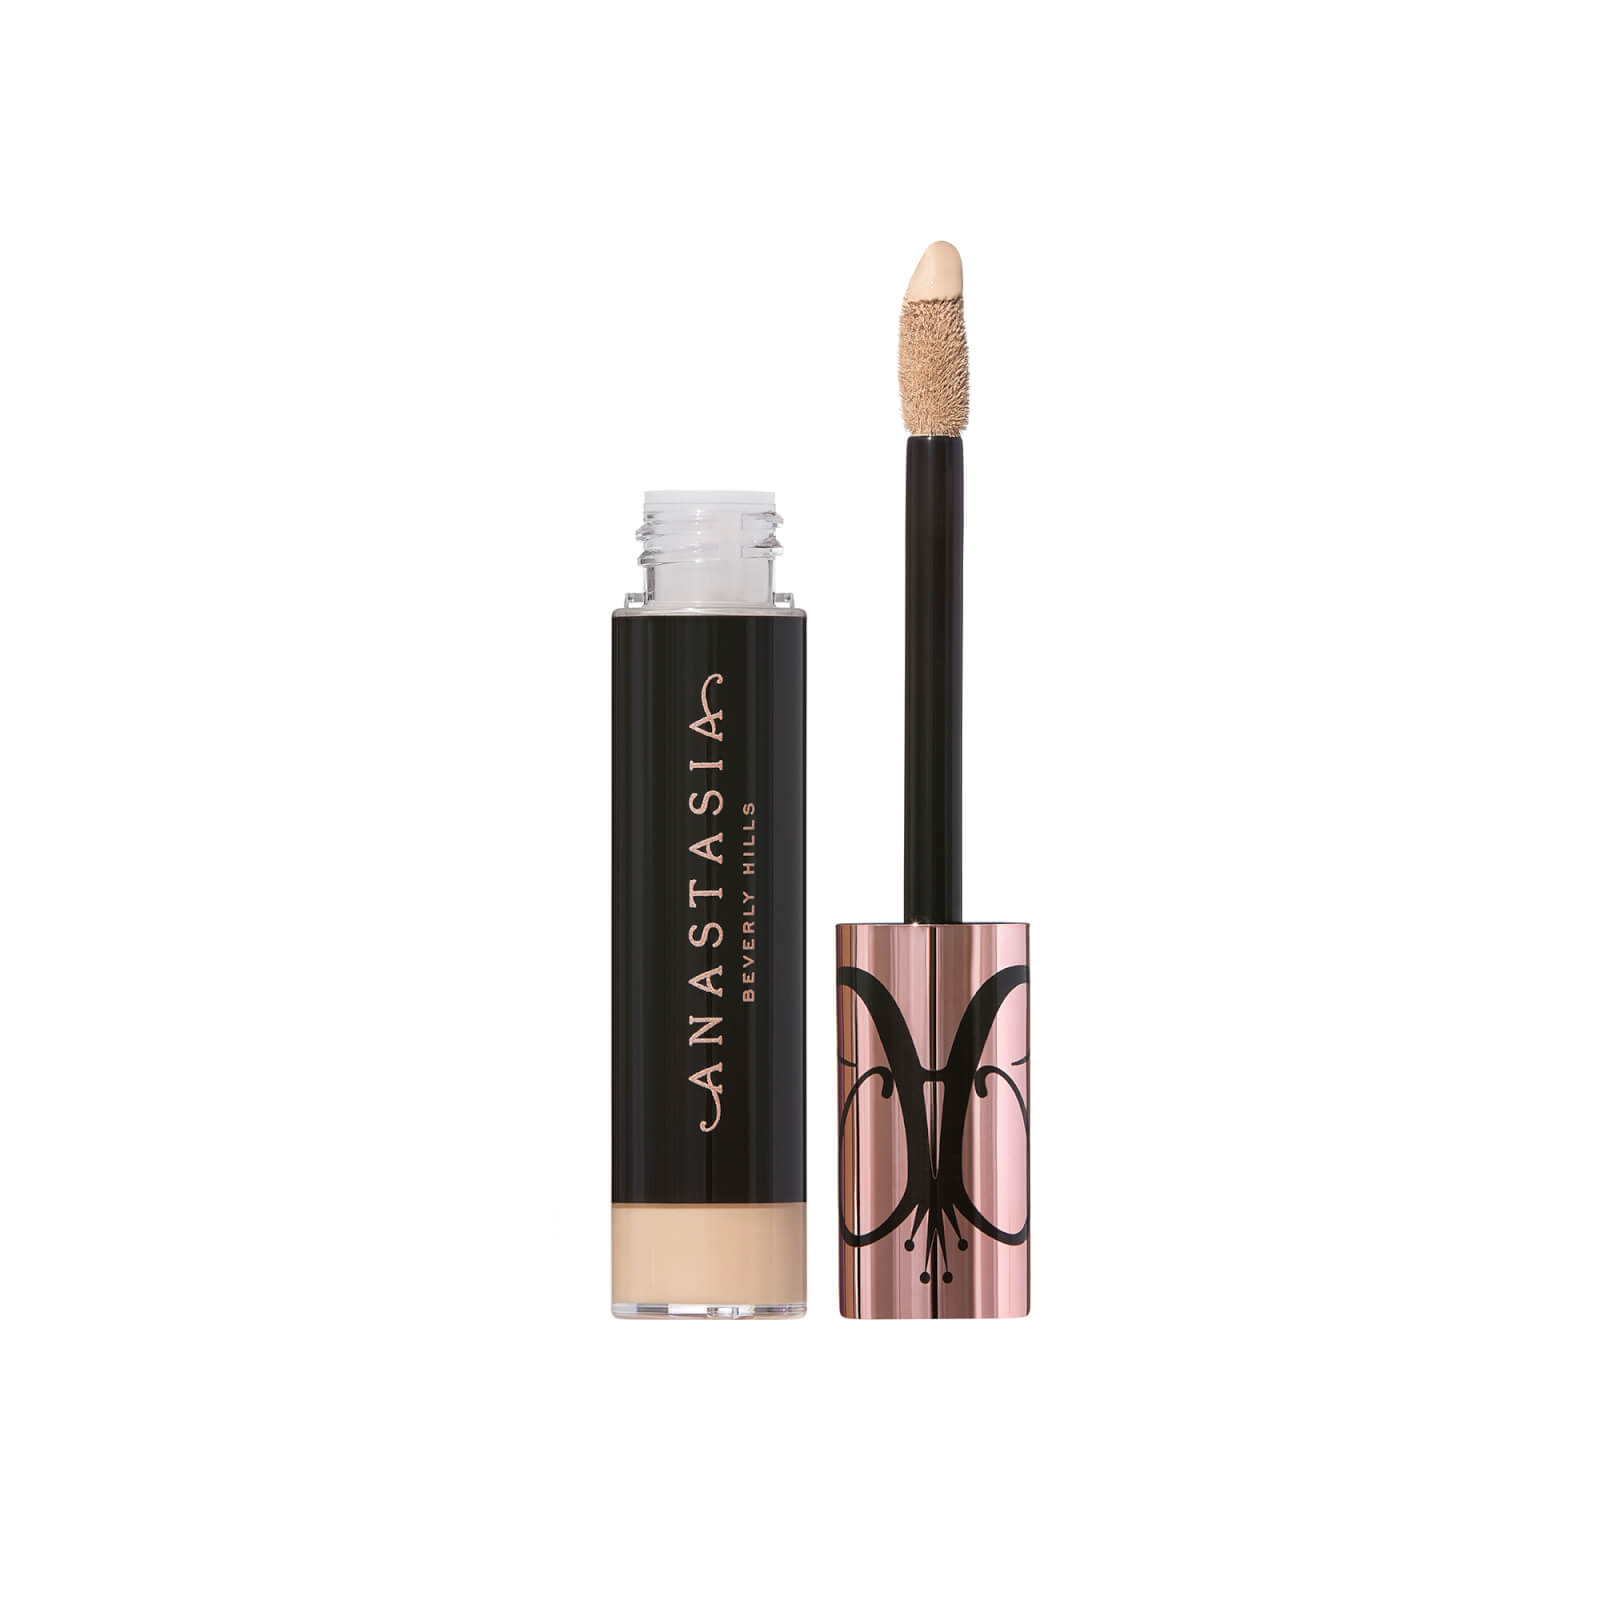 Anastasia Beverly Hills Magic Touch Concealer 12ml (Various Shades) - 8